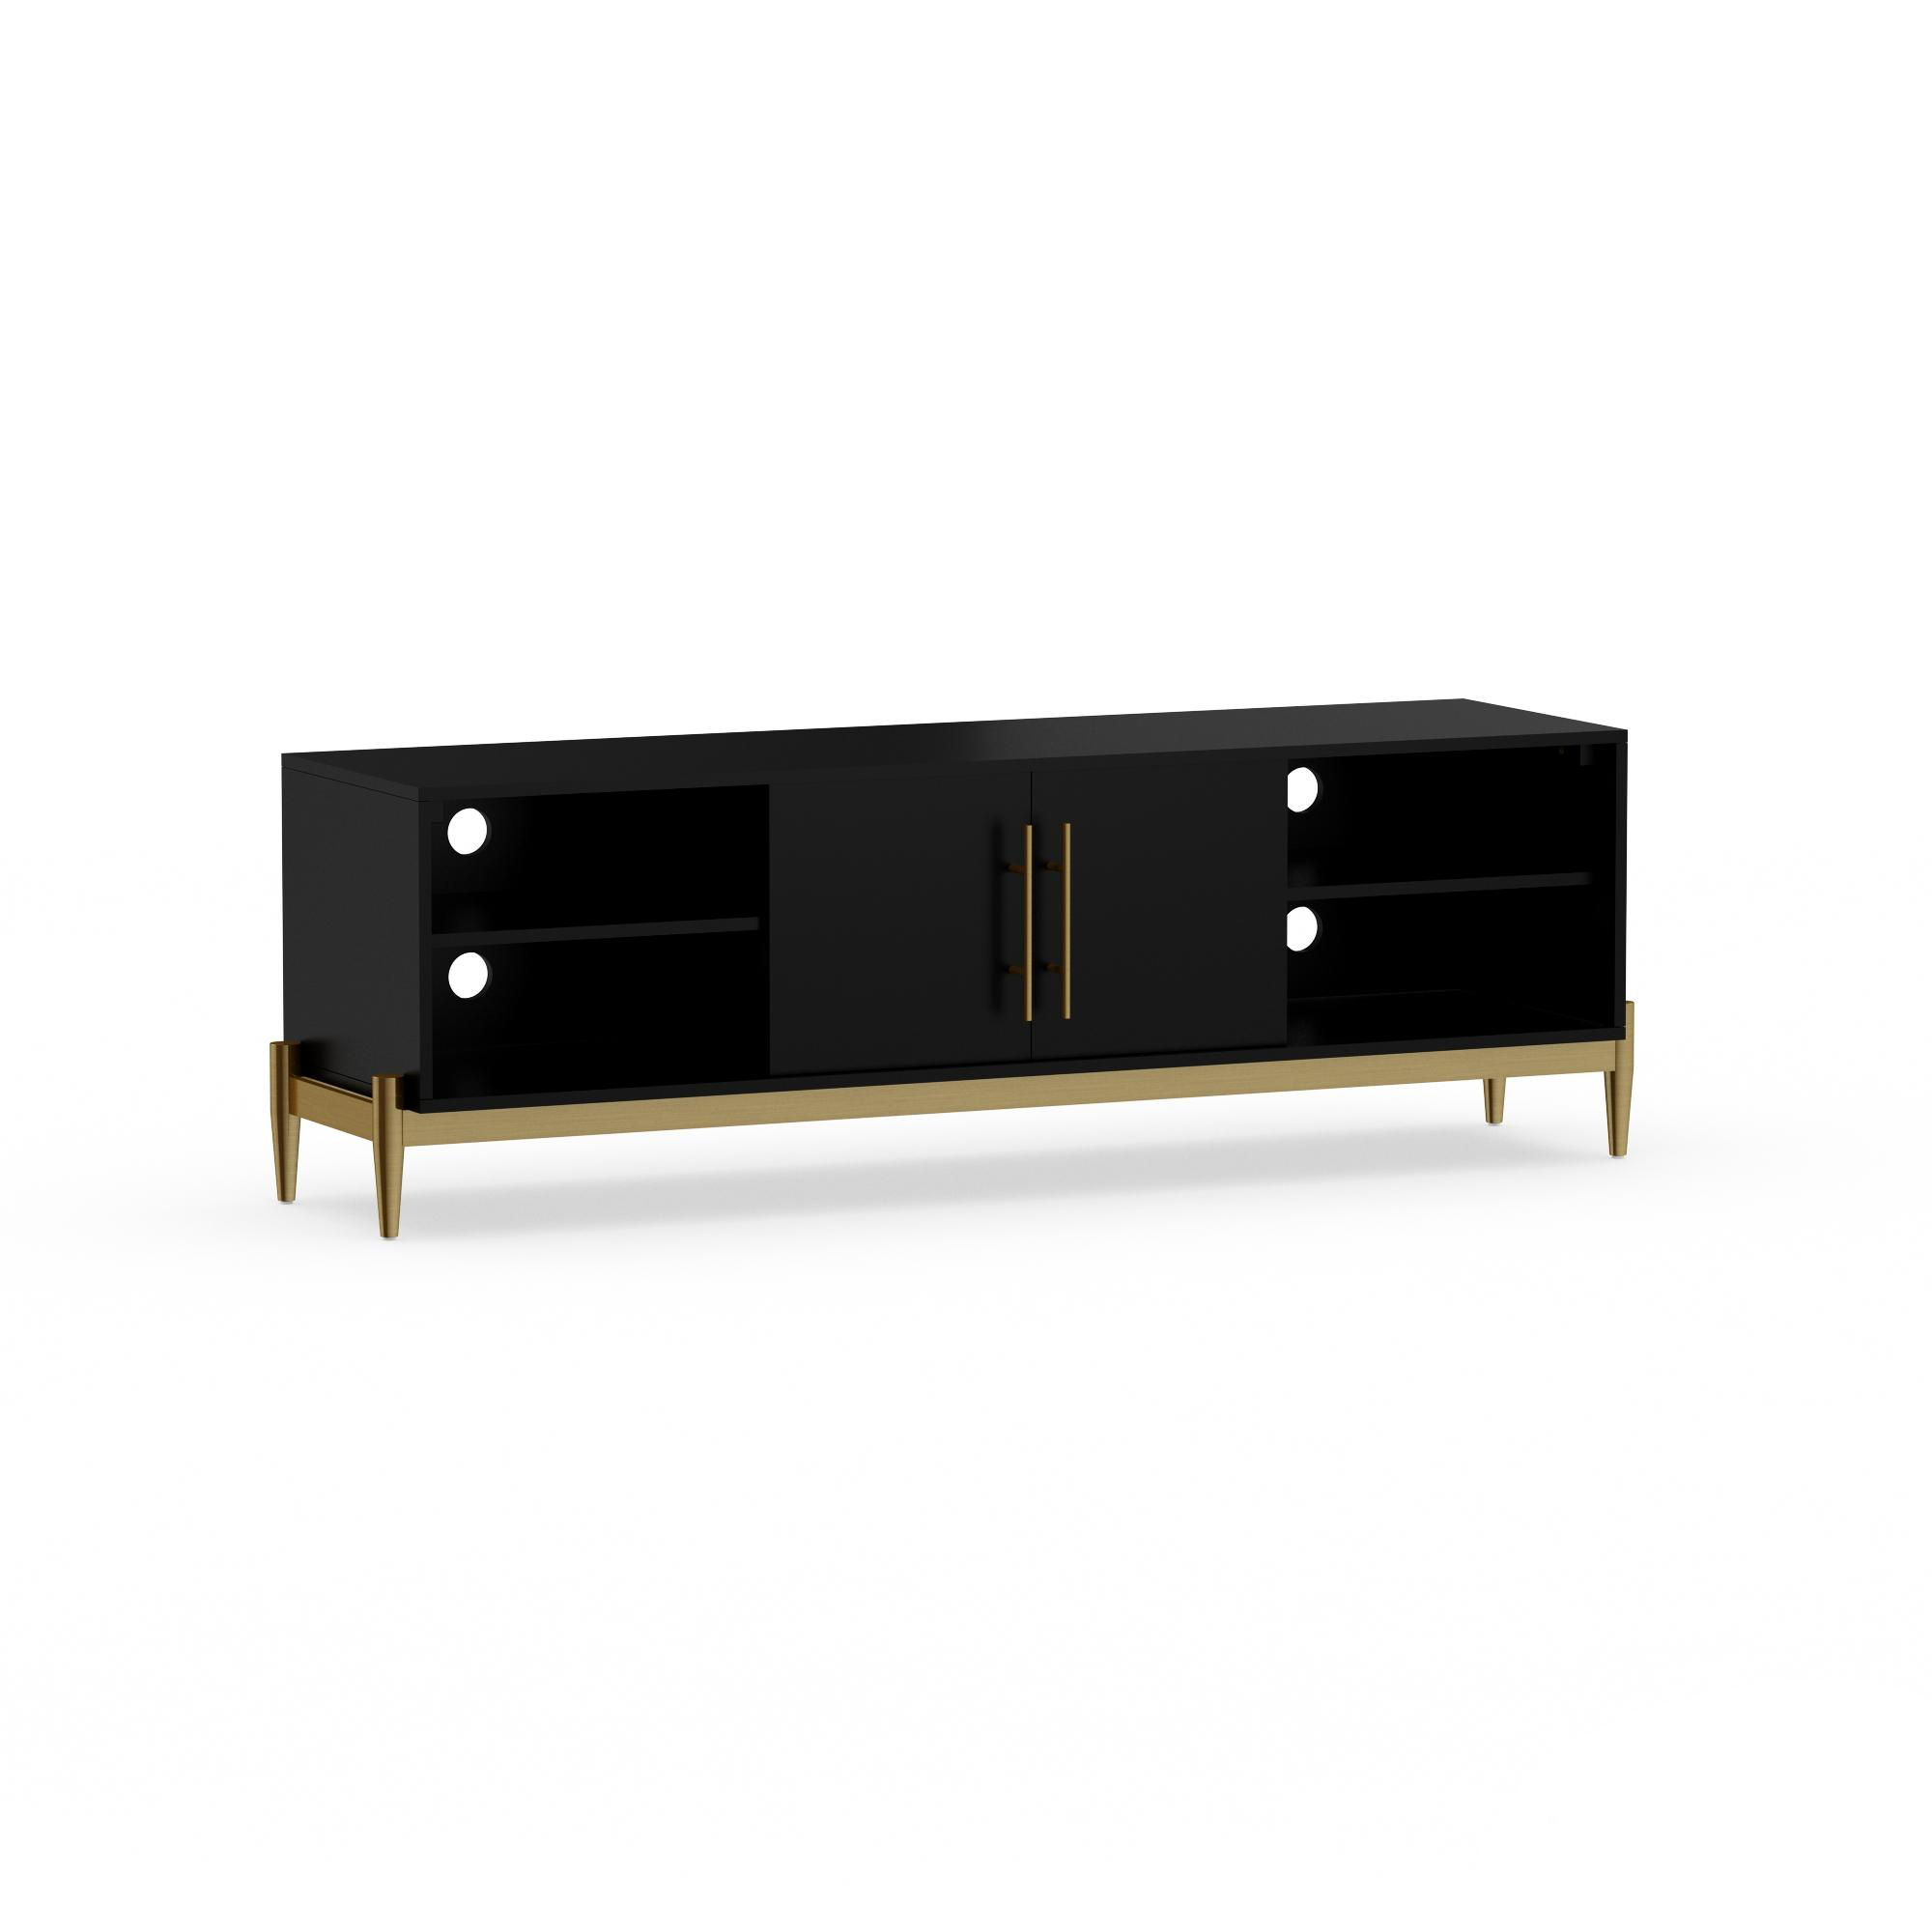 MoDRN Neo Luxury Dylan TV Stand for TVs Up to 65" - image 4 of 9